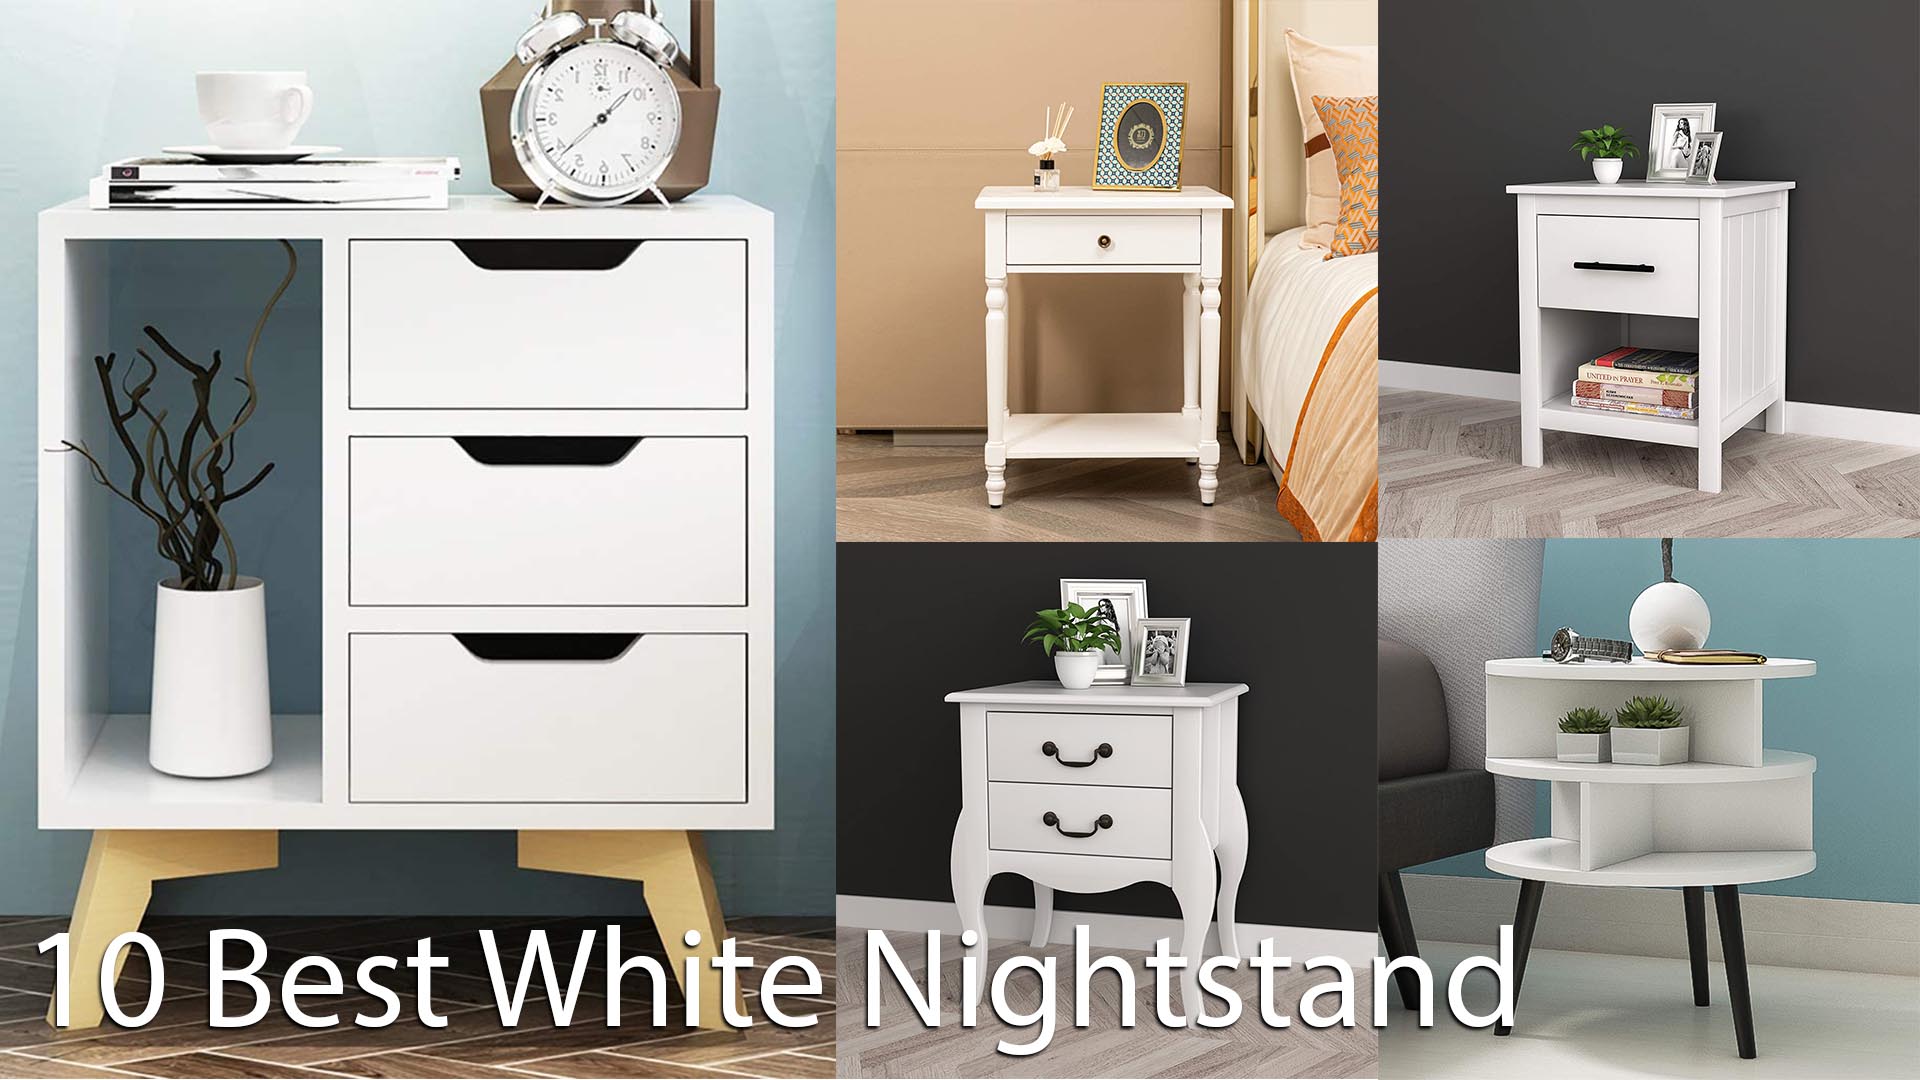 Best White Nightstand for Your Bedroom Decor